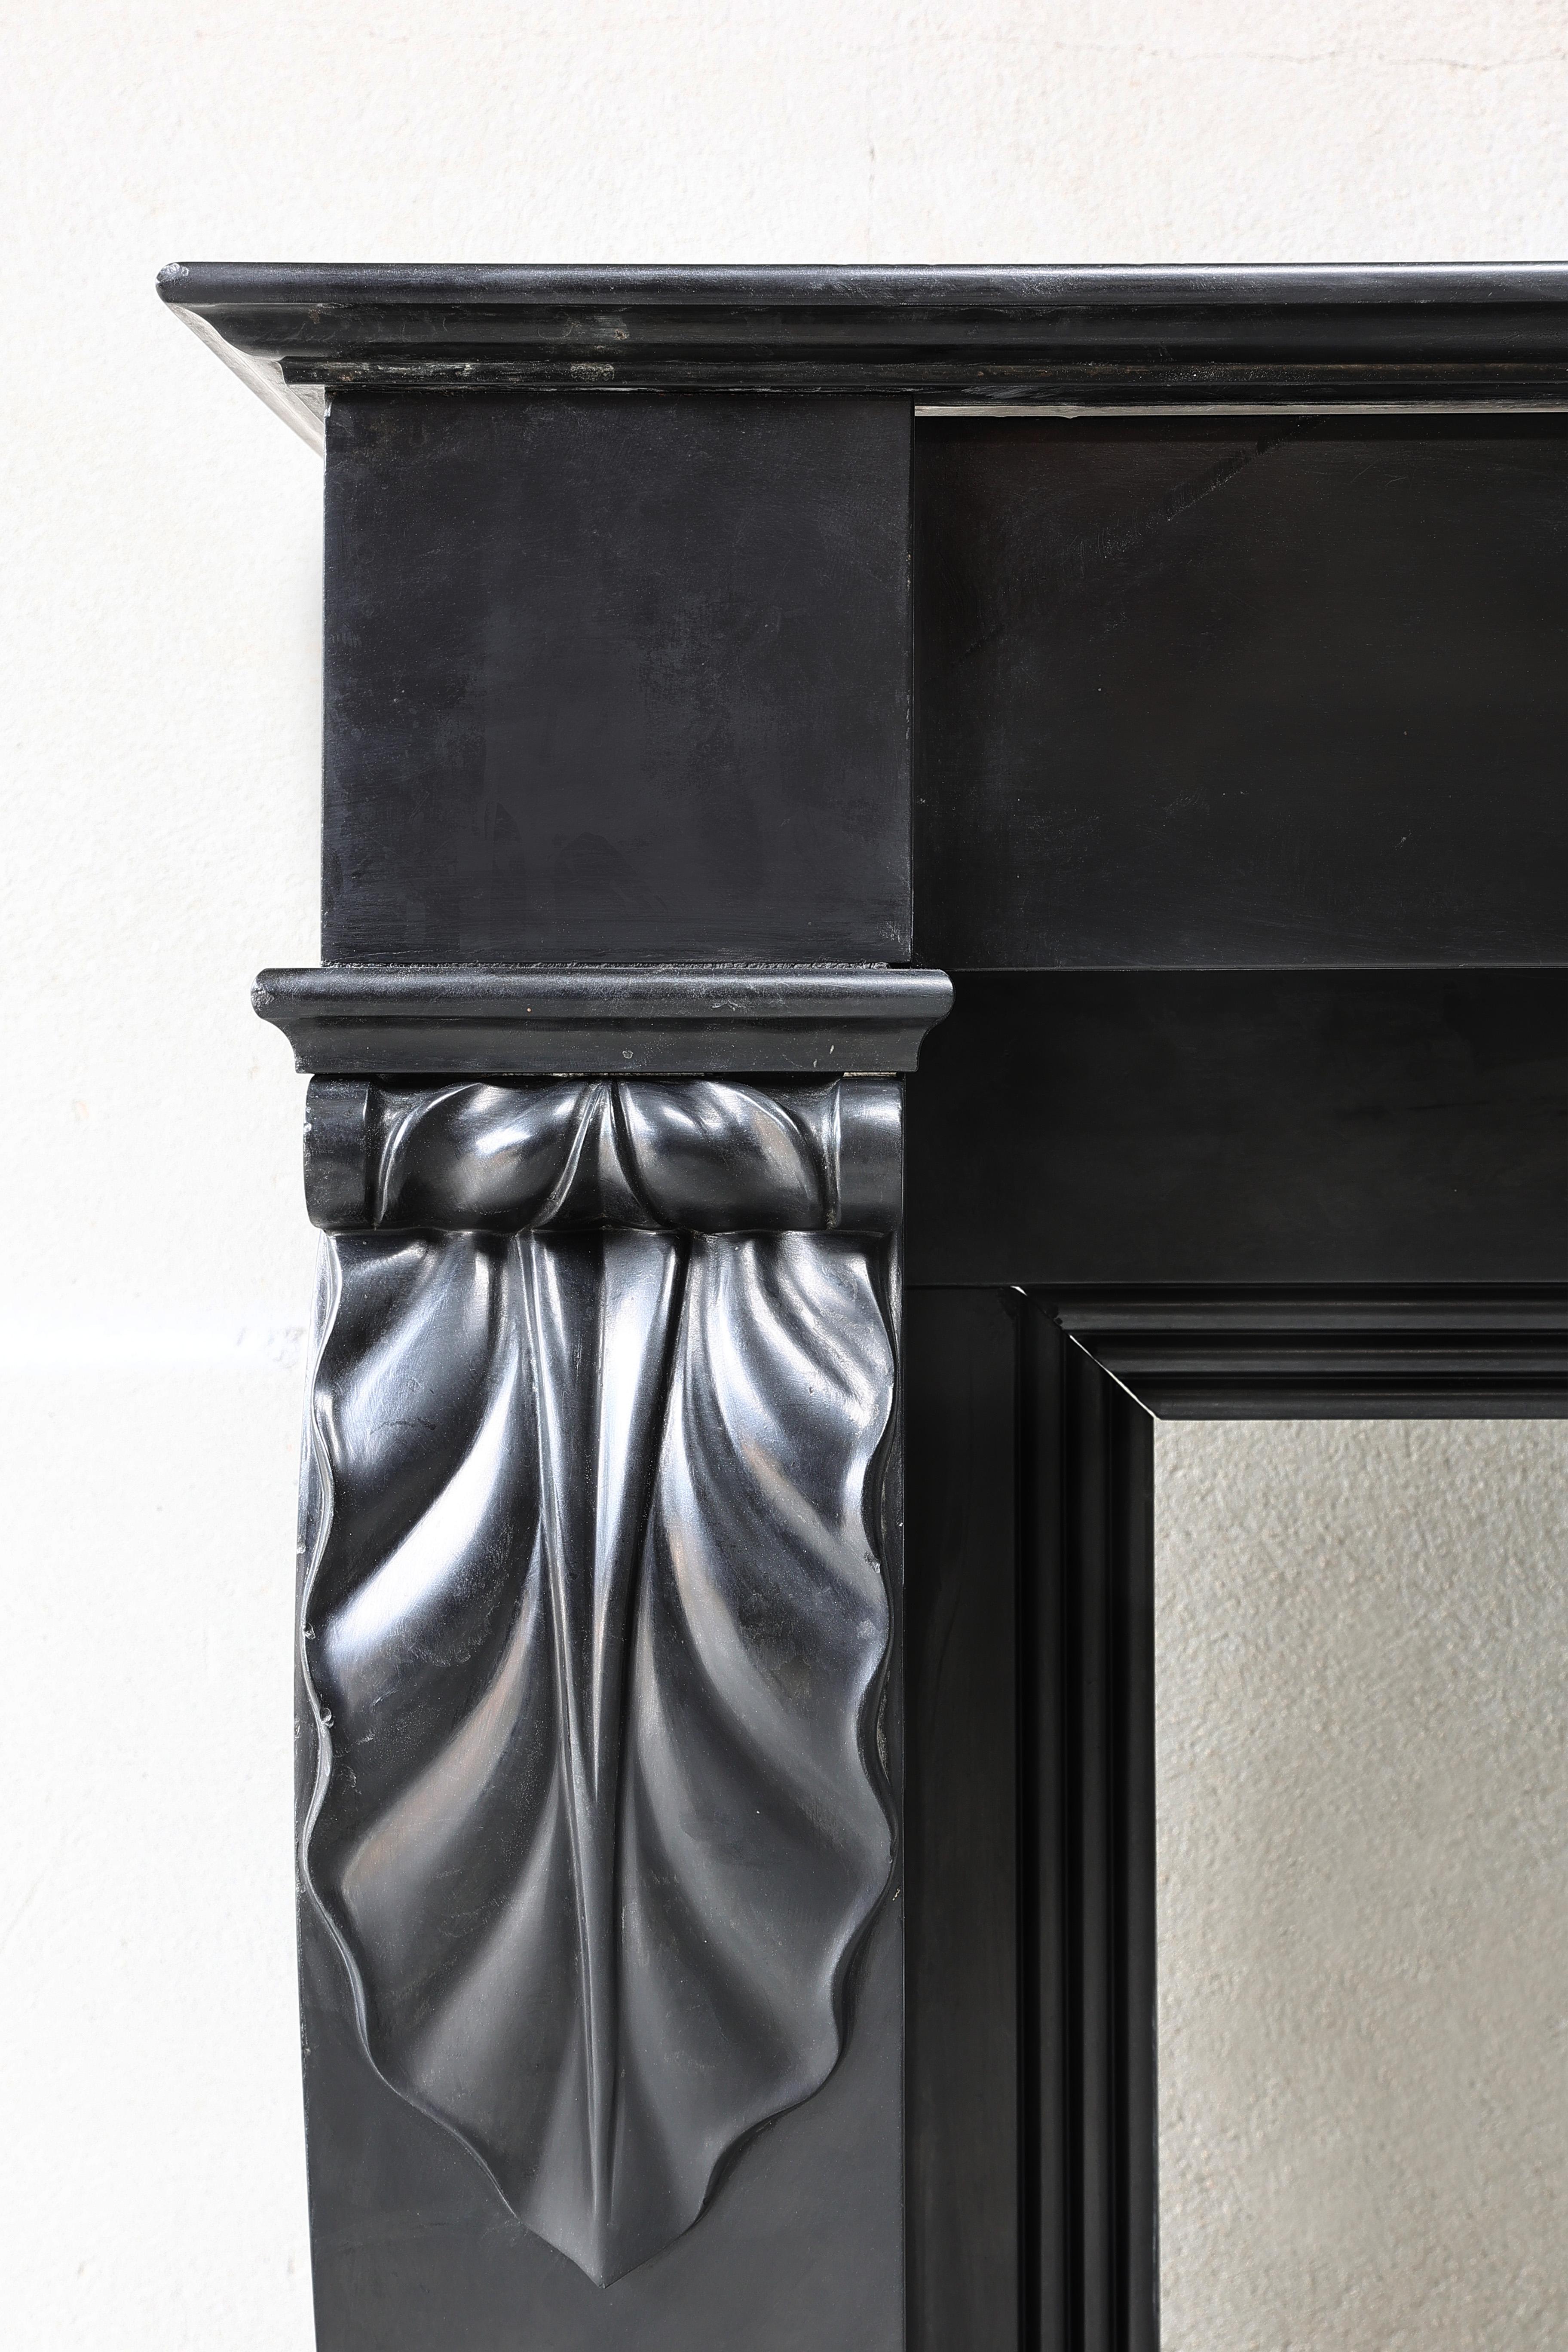 Noir De Mazy Marble Fireplace from the 19th Century in Style of Louis XVI For Sale 6